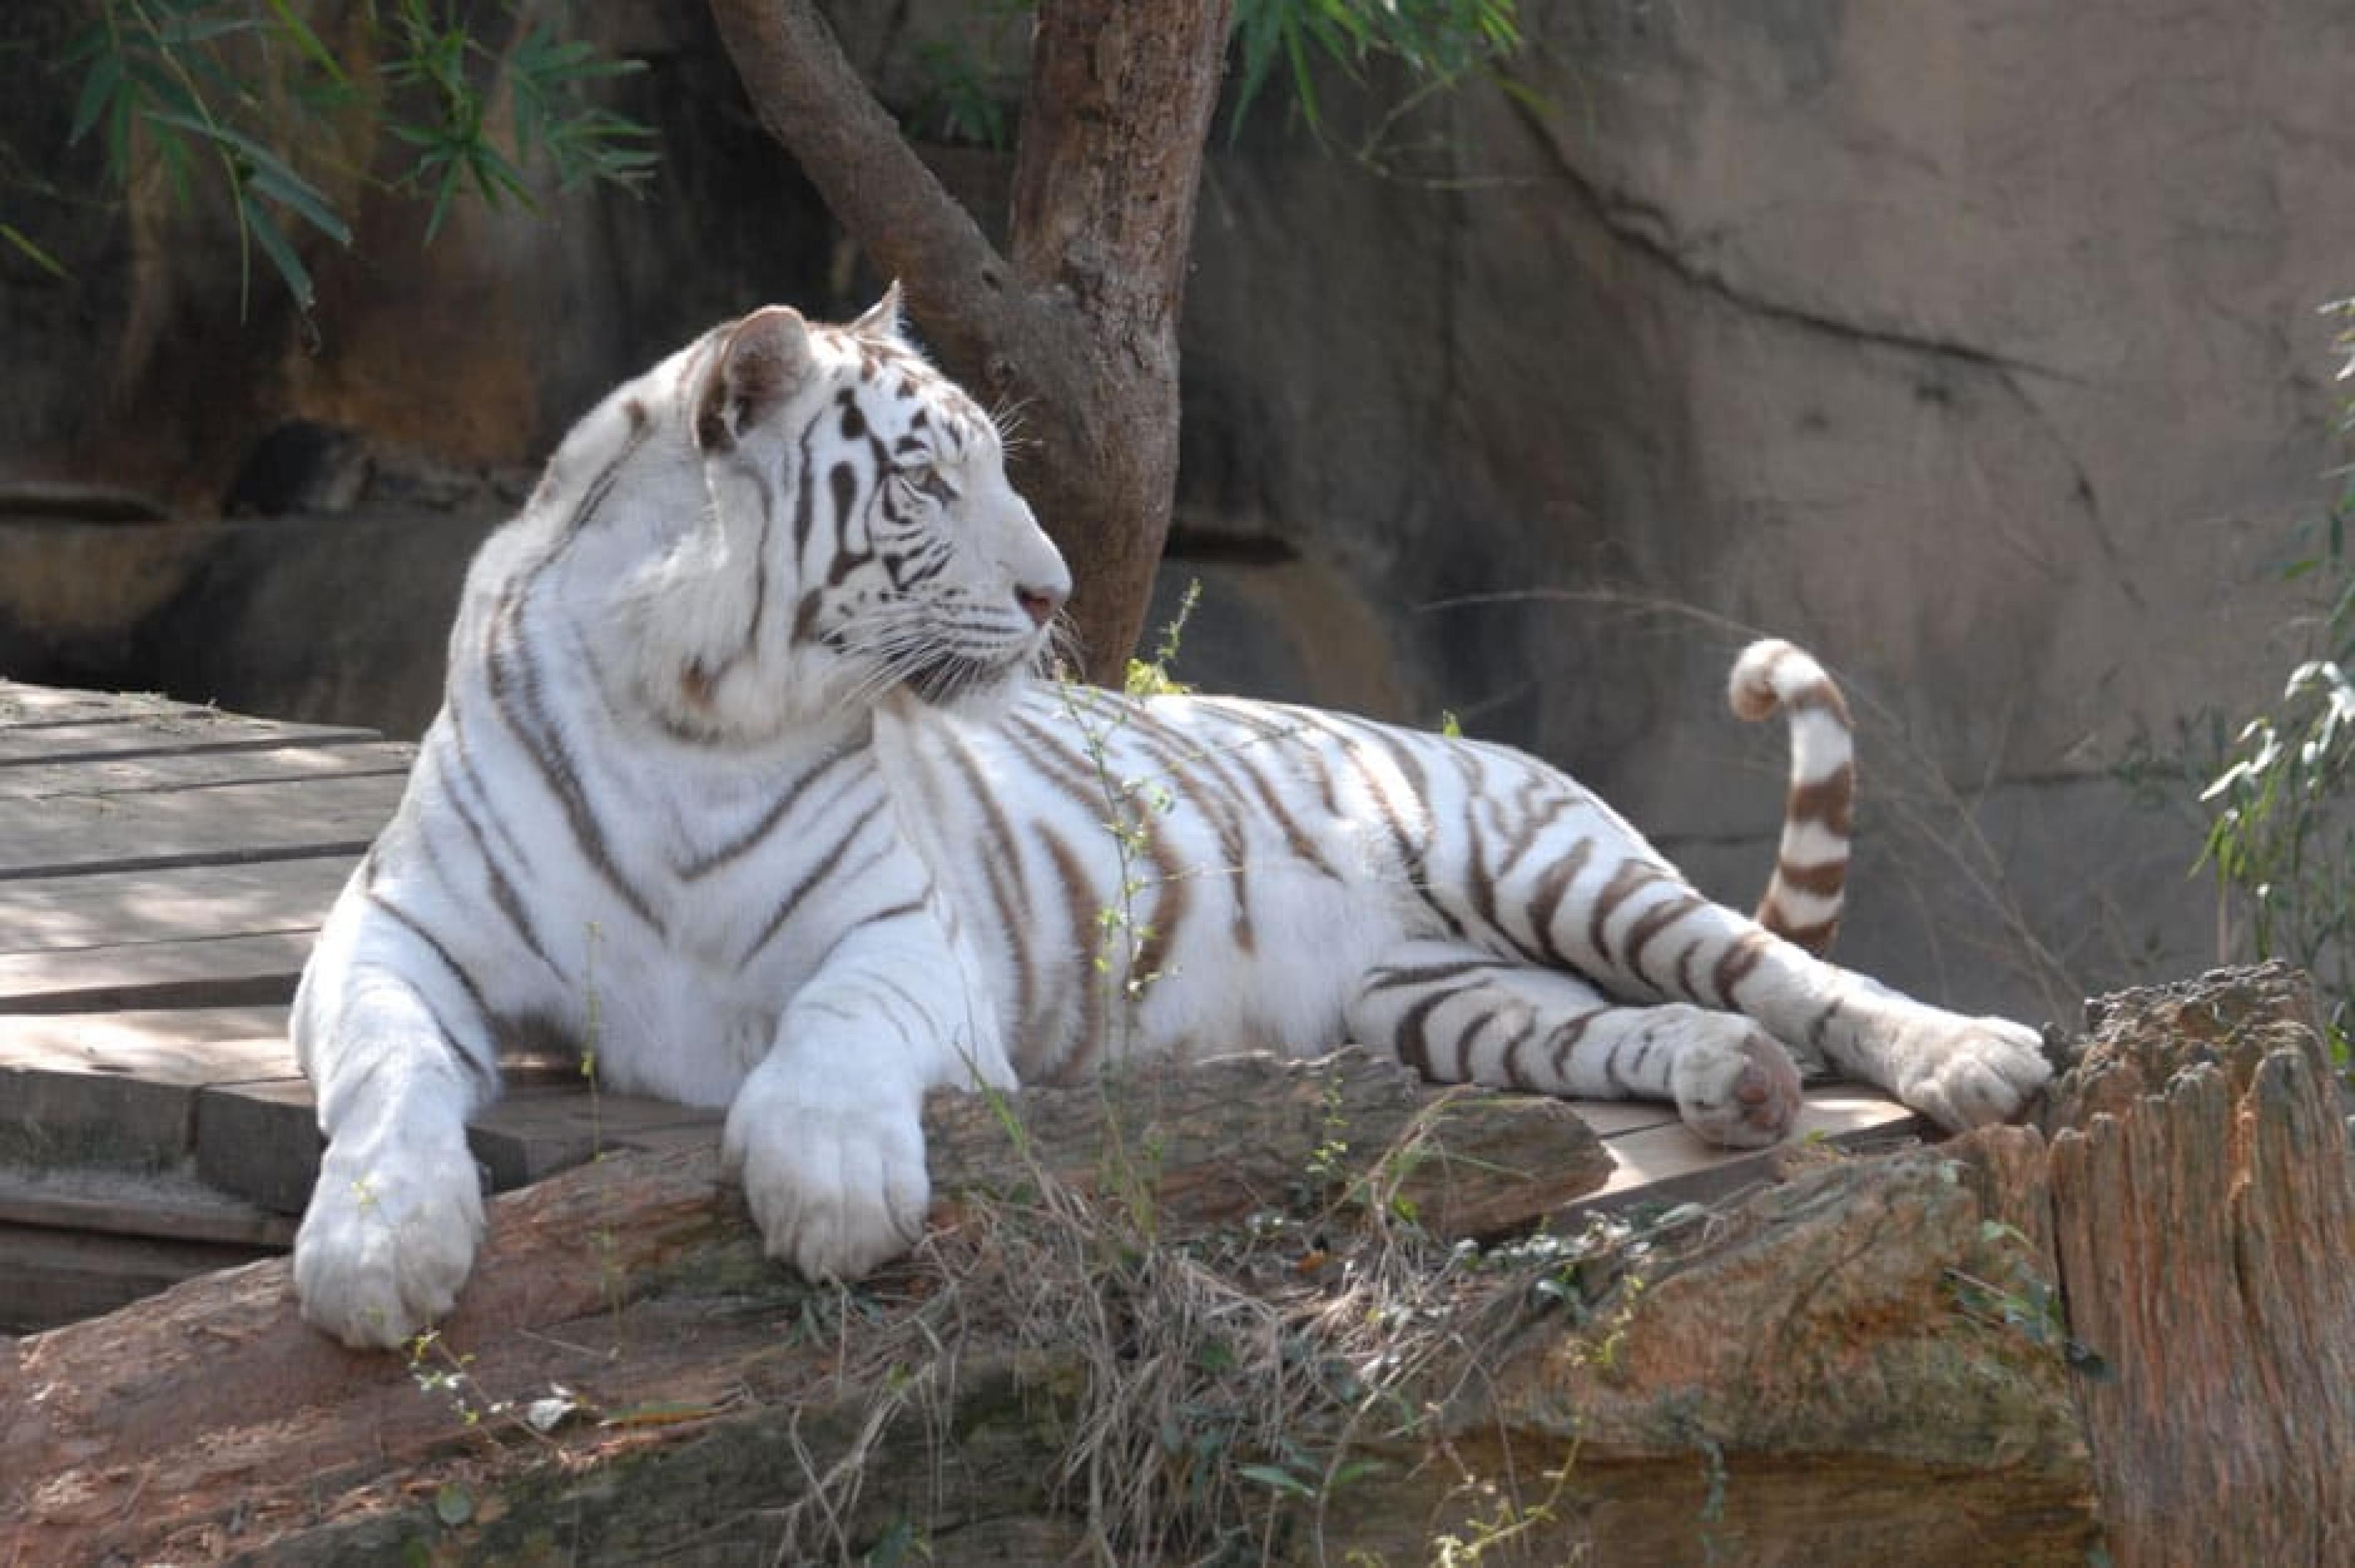 Tiger - Audubon Zoo, New Orleans, American South